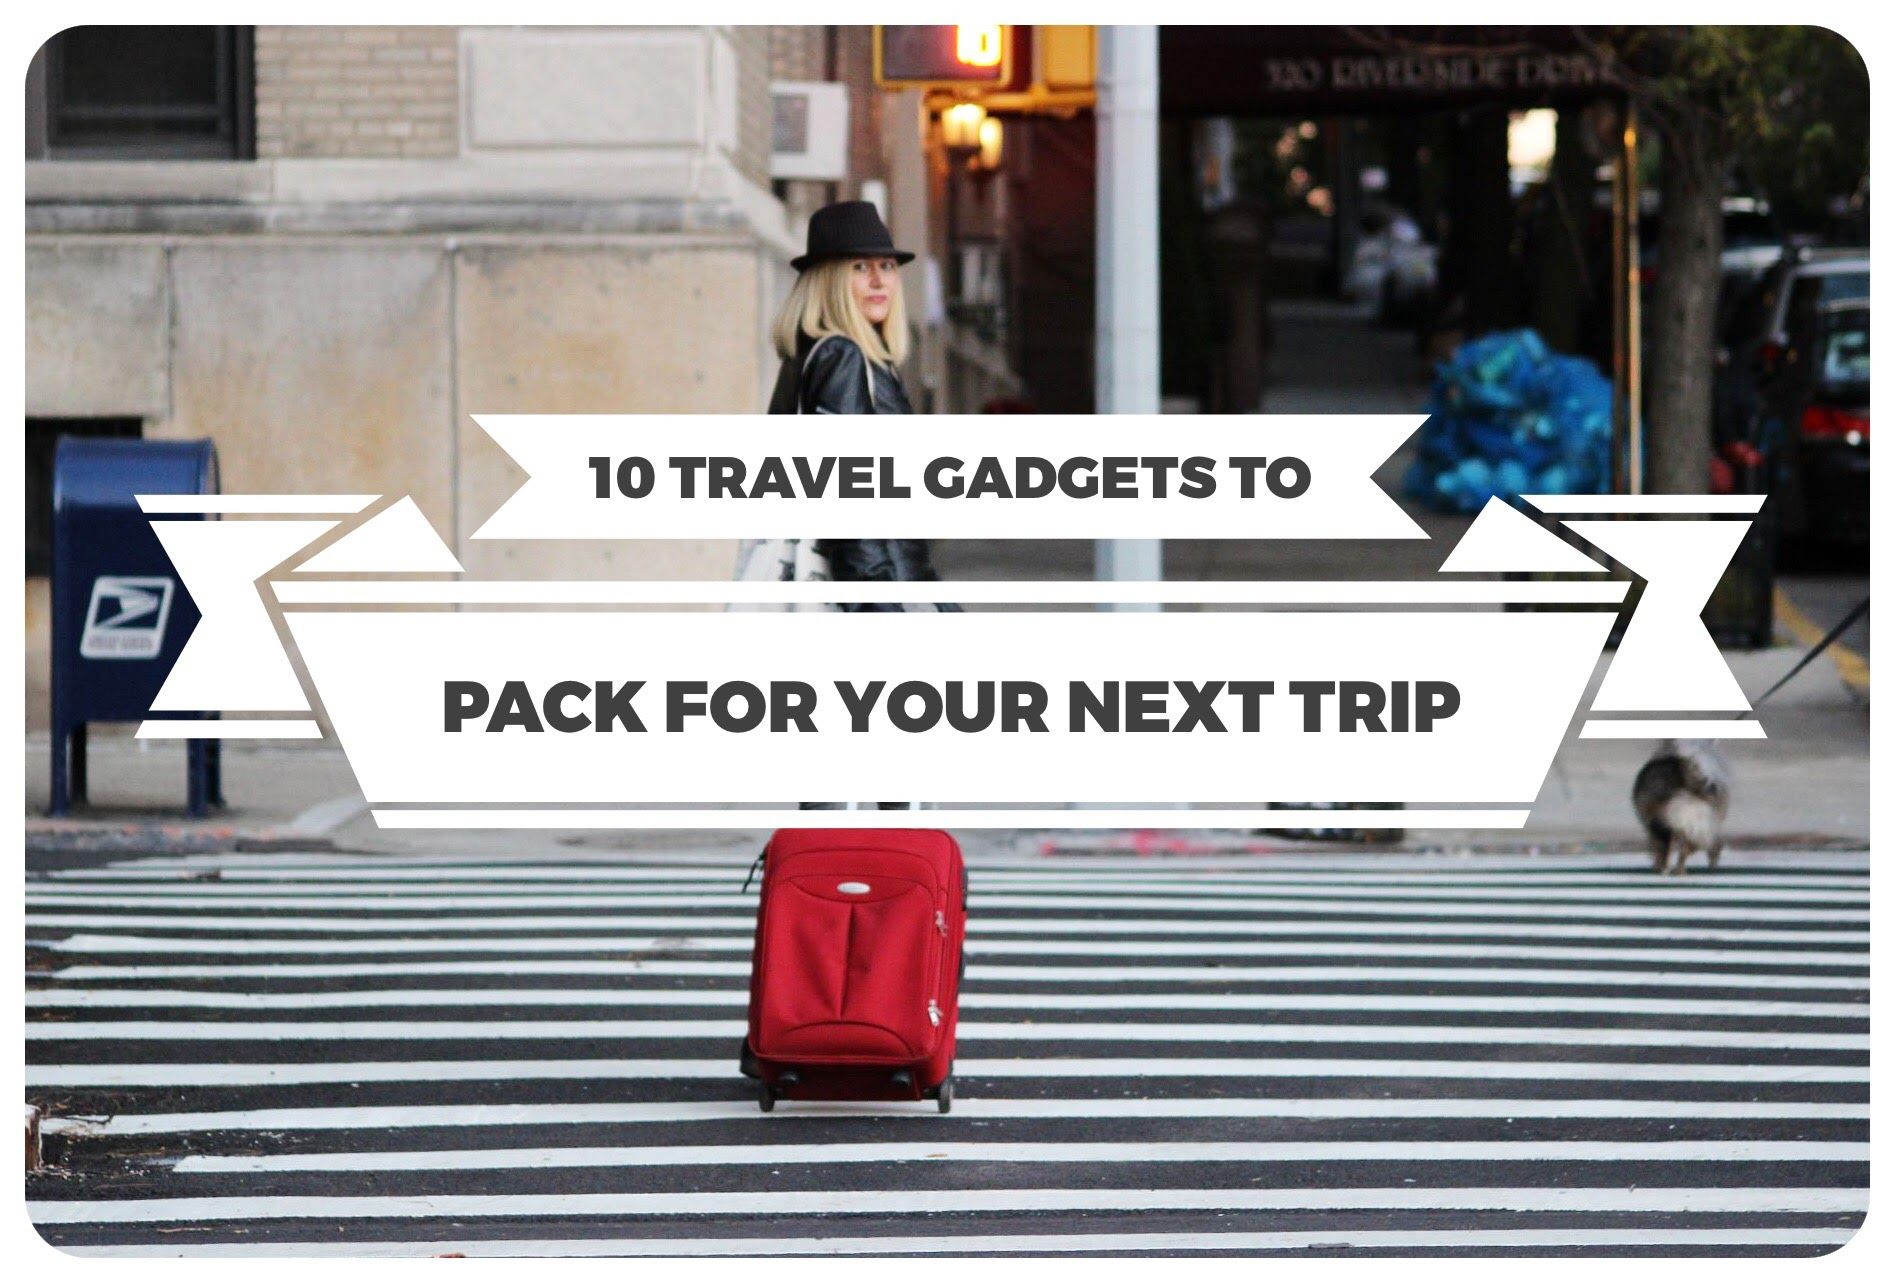 10 Travel Gadgets And Accessories You'll Want To Pack For Your Next Trip  (2017 Edition)